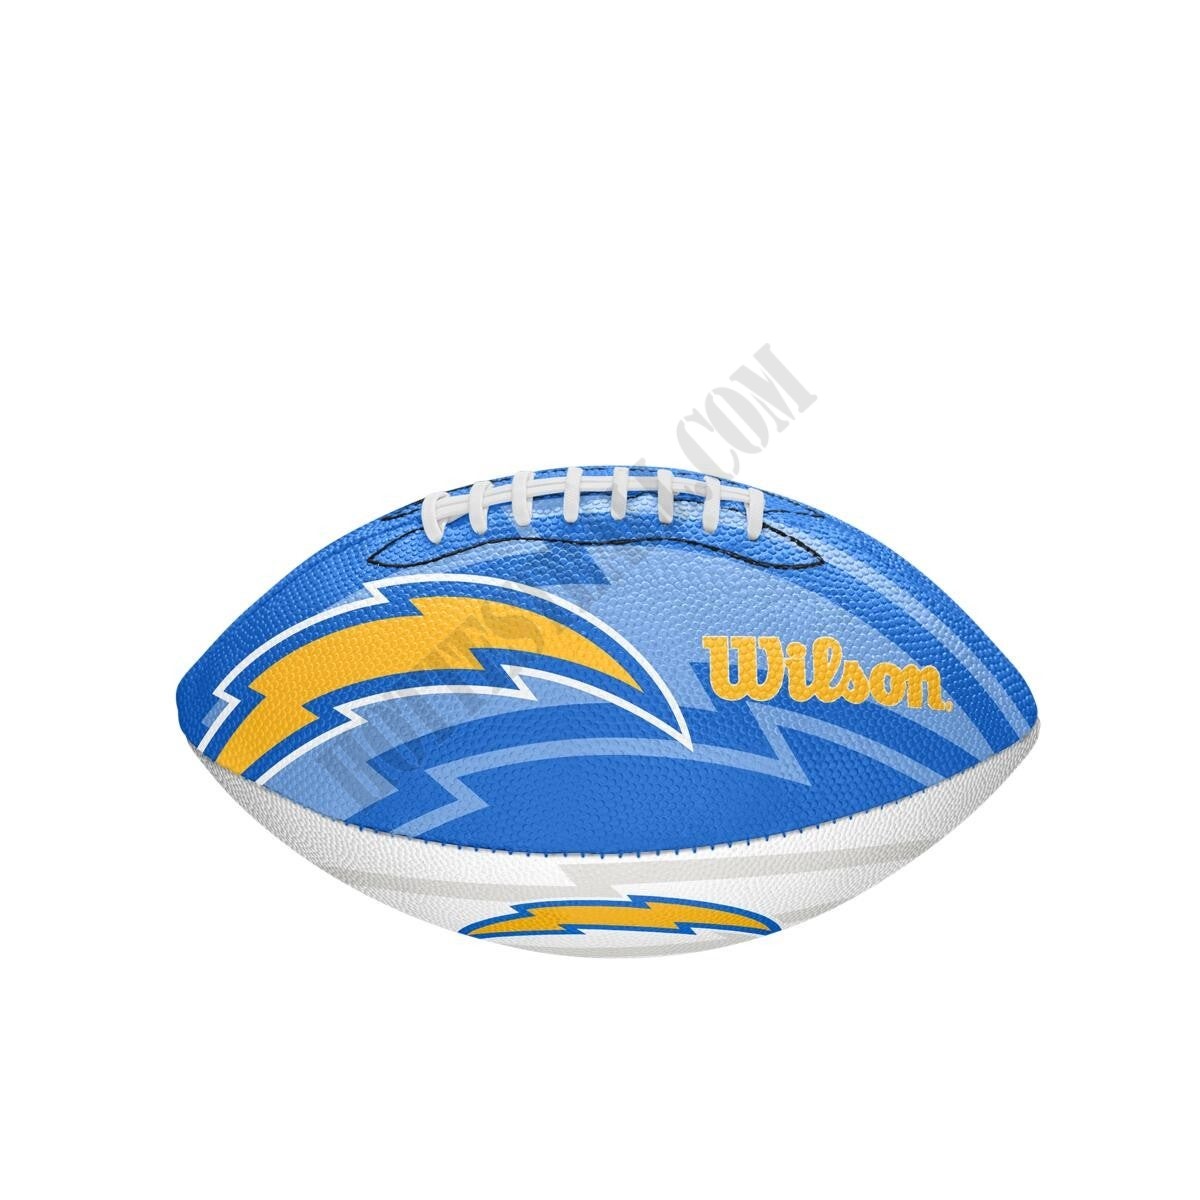 NFL Team Tailgate Football - Los Angeles Chargers ● Wilson Promotions - -0